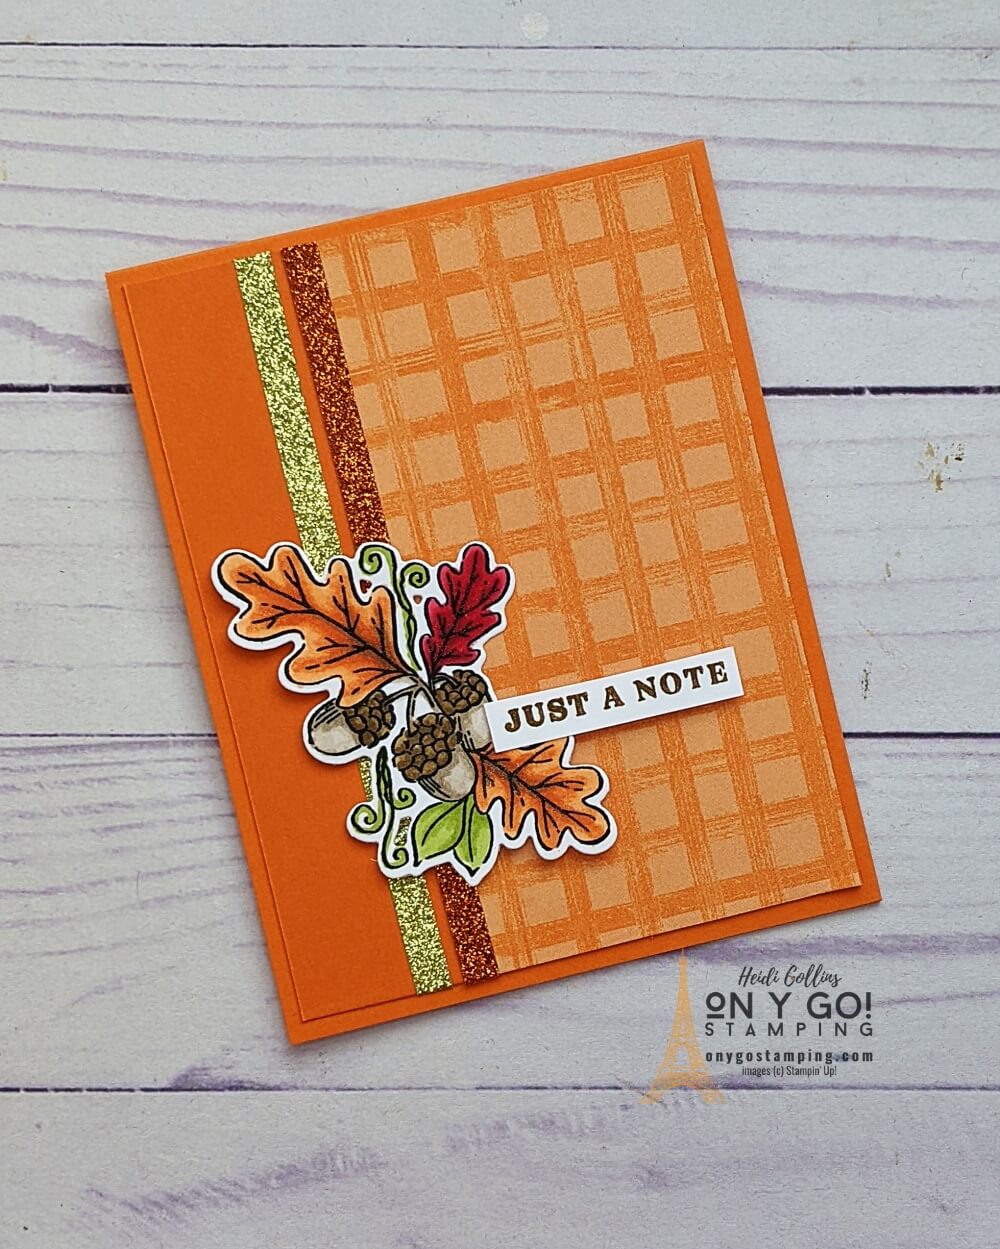 Create a beautiful handmade fall card with the Fond of Autumn stamp set and glitter washi tape from Stampin' Up!®